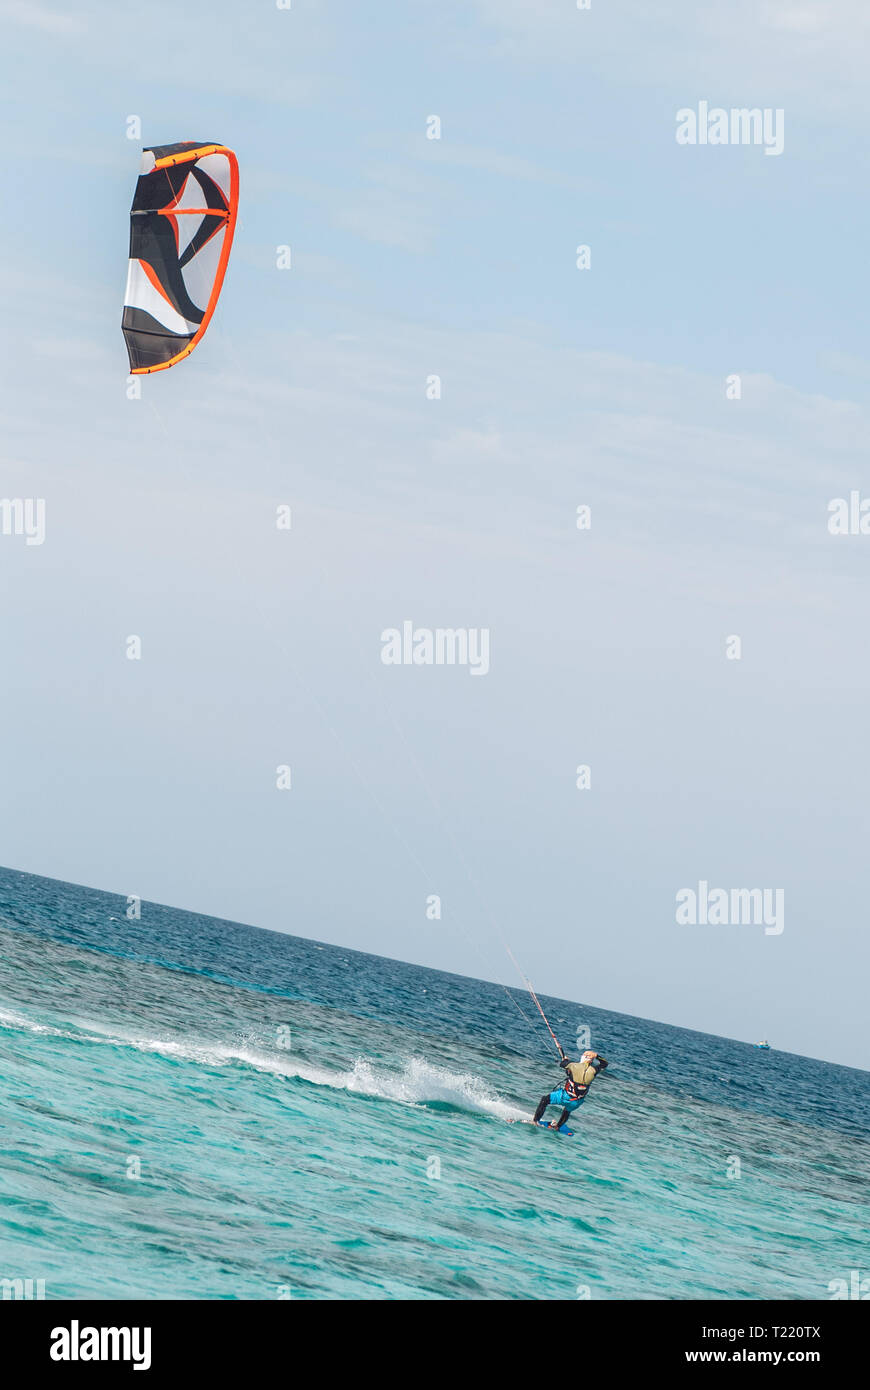 professional kiter glide the water surface of the ocean at great speed. Back view behind extreme wide shot Stock Photo